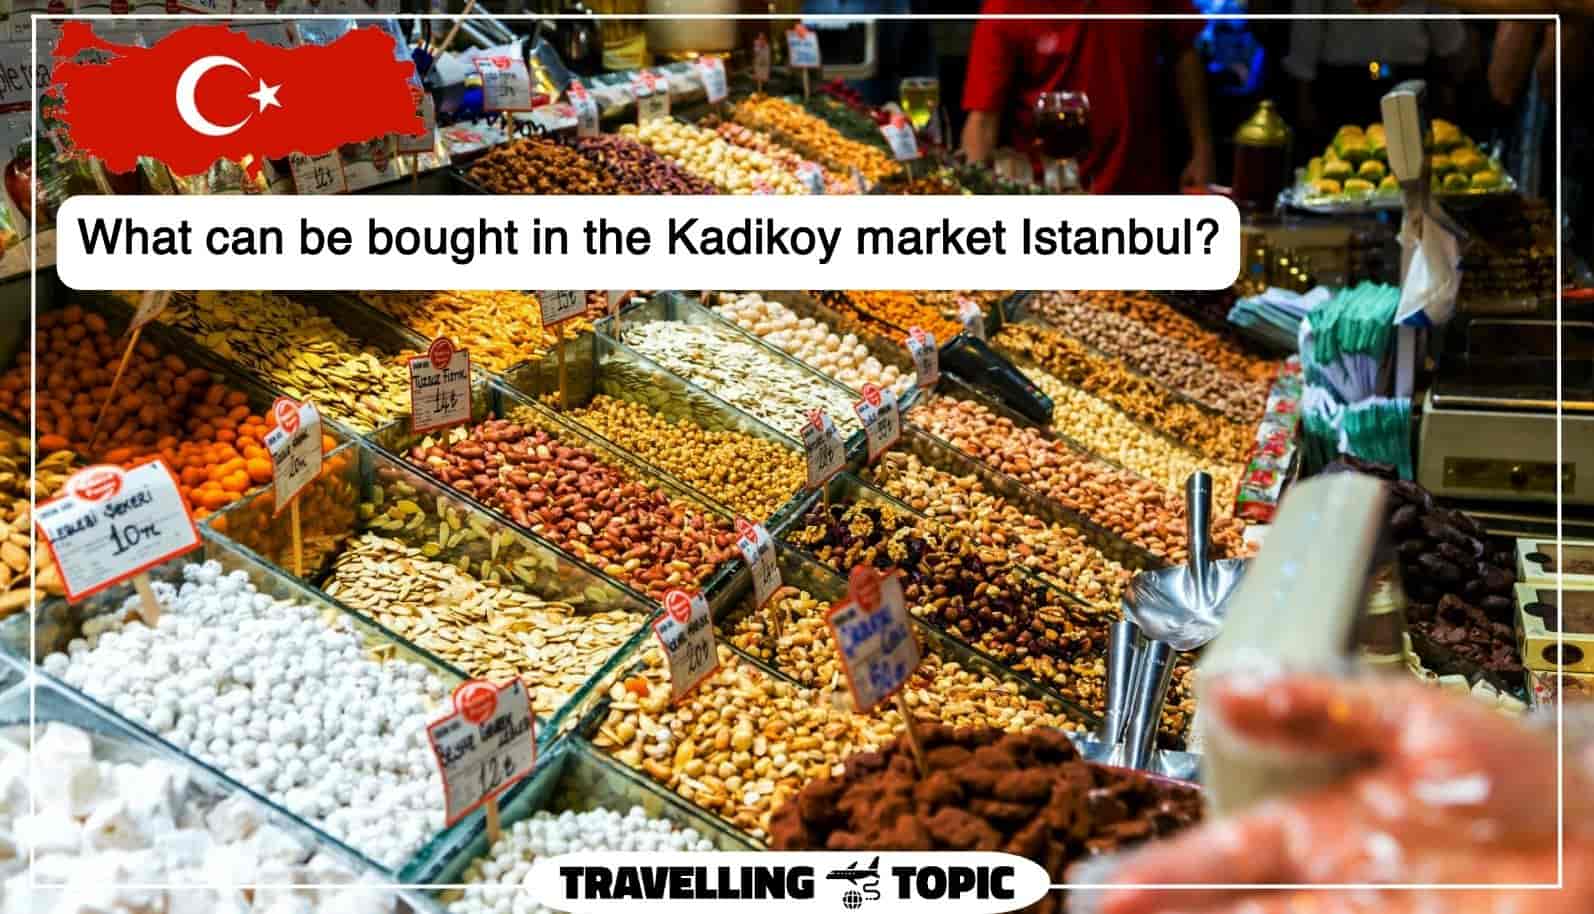 What can be bought in the Kadikoy market Istanbul